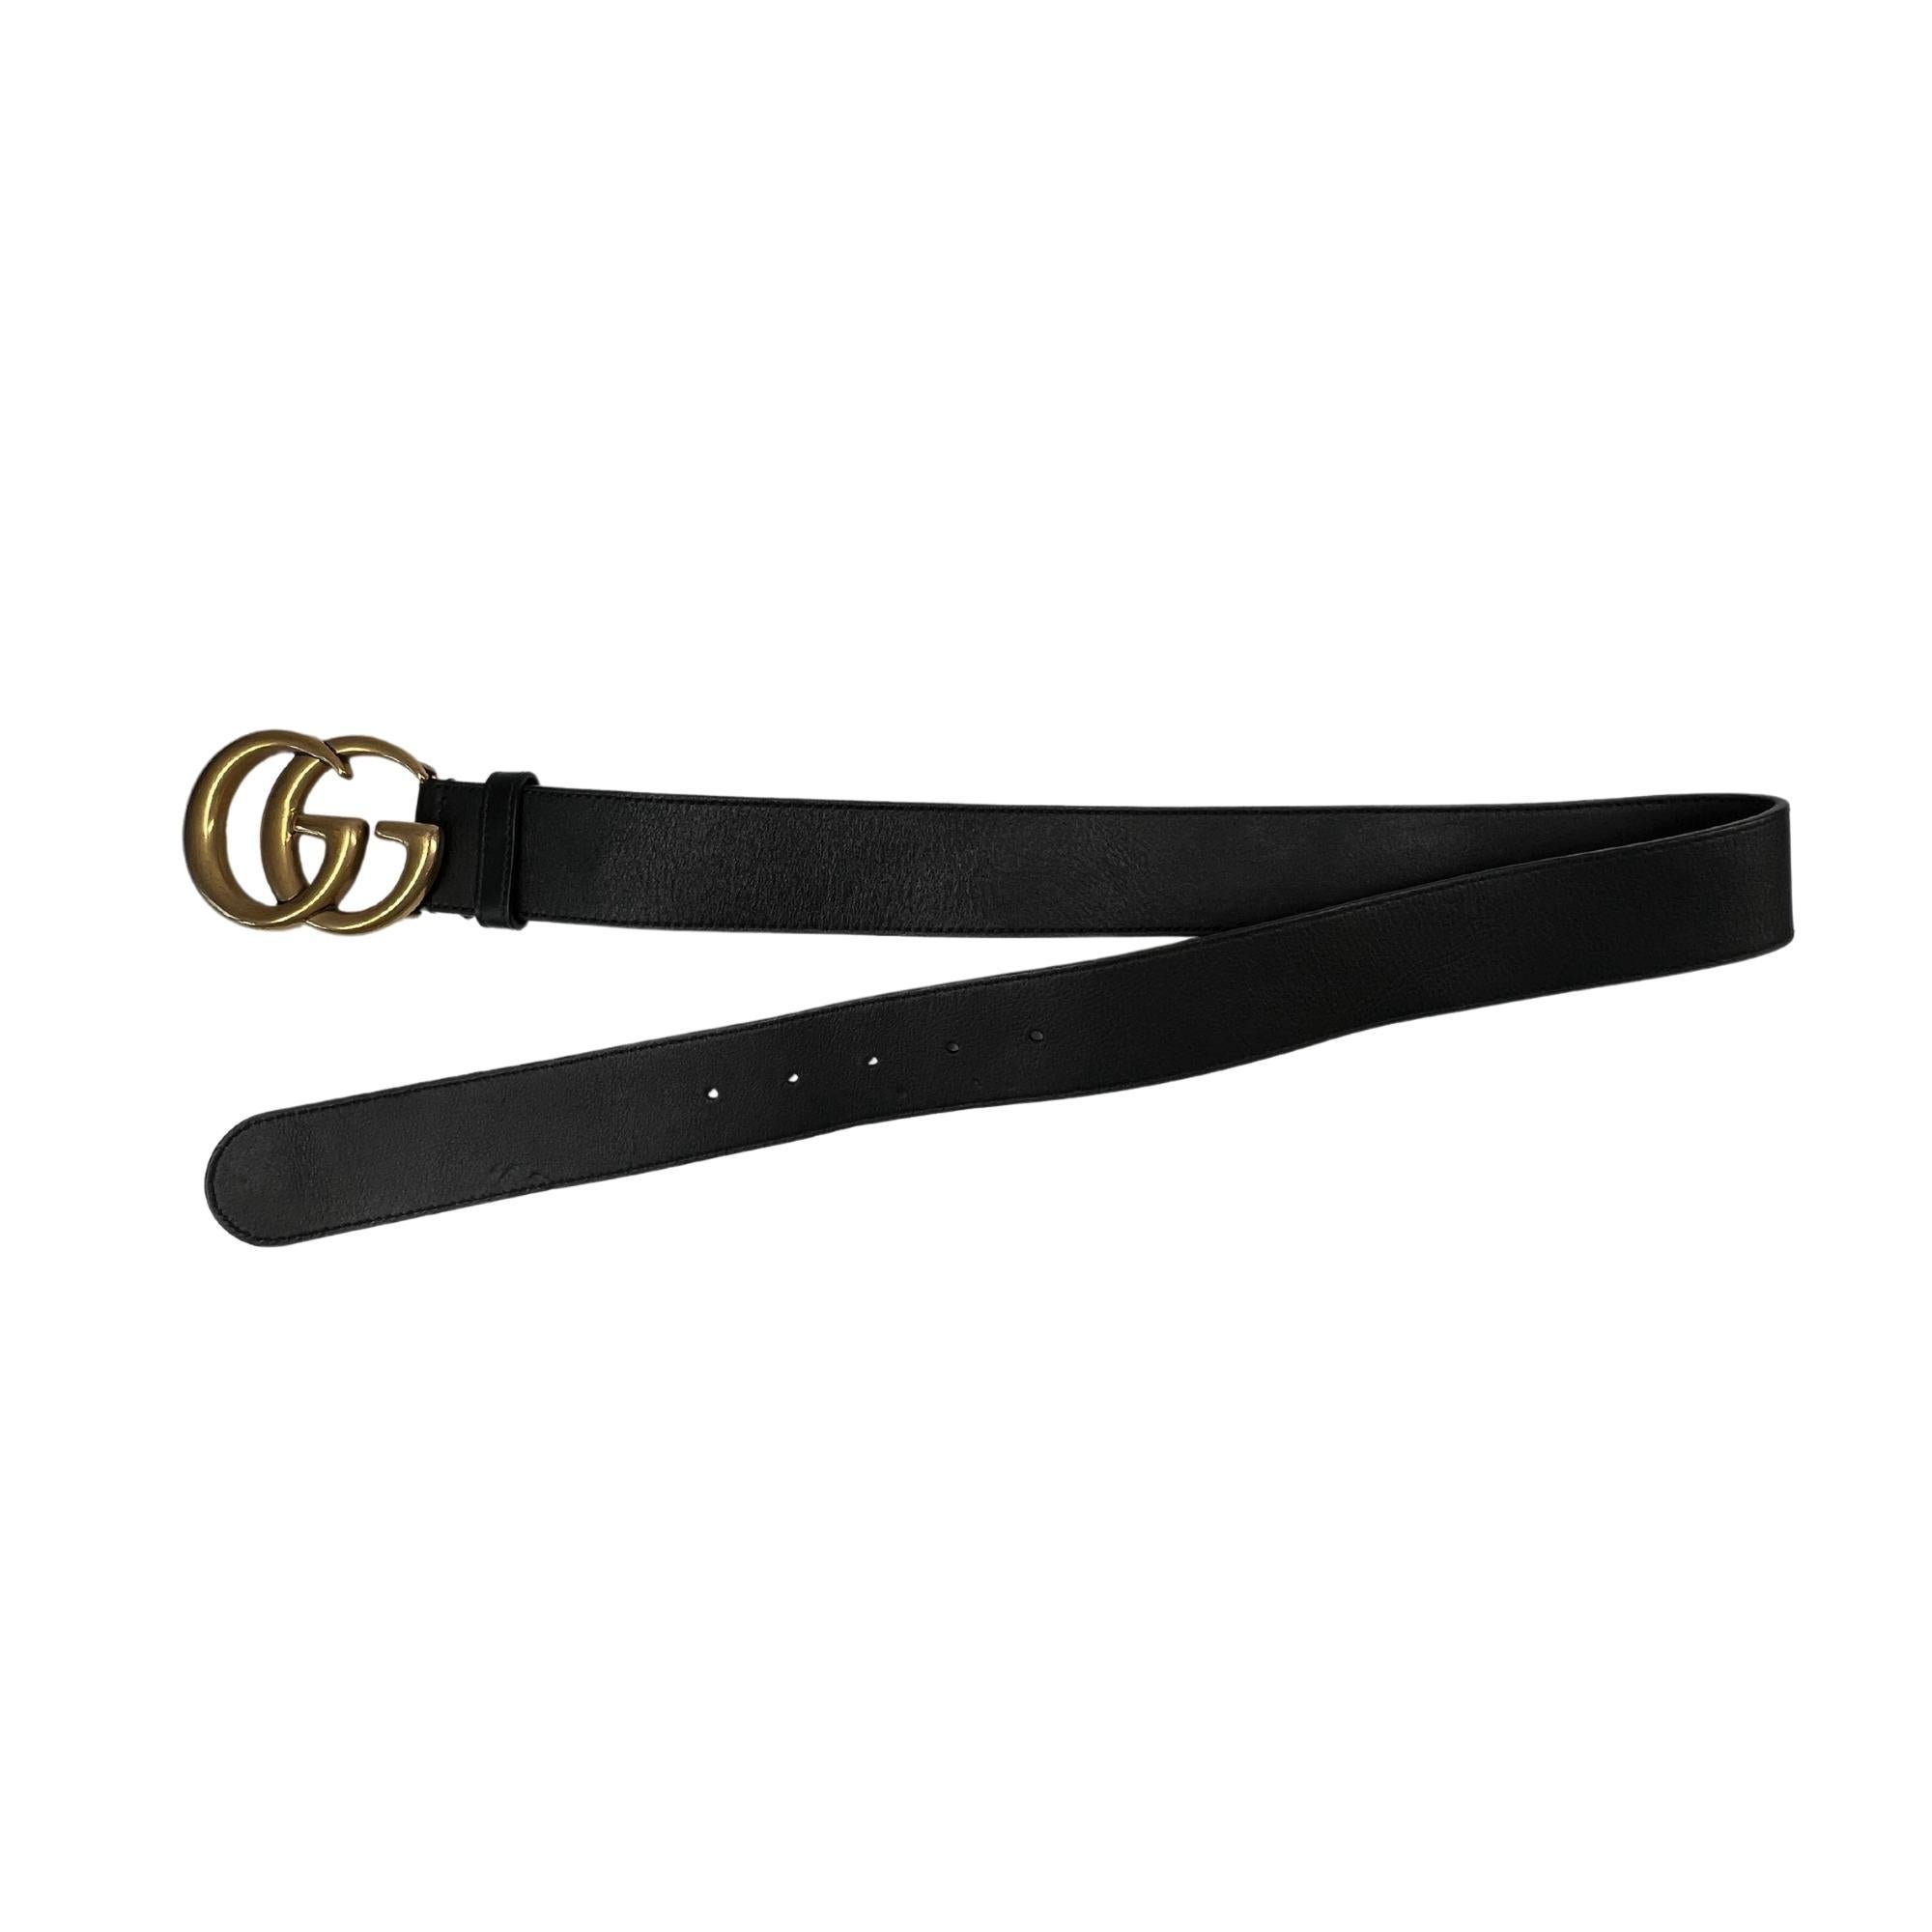 This stylish belt is made of black calfskin leather and features an interlocking GG buckle in antique brass.

COLOR: Black
ITEM CODE: 400593
MEASURES: L 34.5” x W 1.5” (belt) & 6cm x 8cm (GG buckle)
SIZE: 75cm/30inch
COMES WITH: Dust bag and